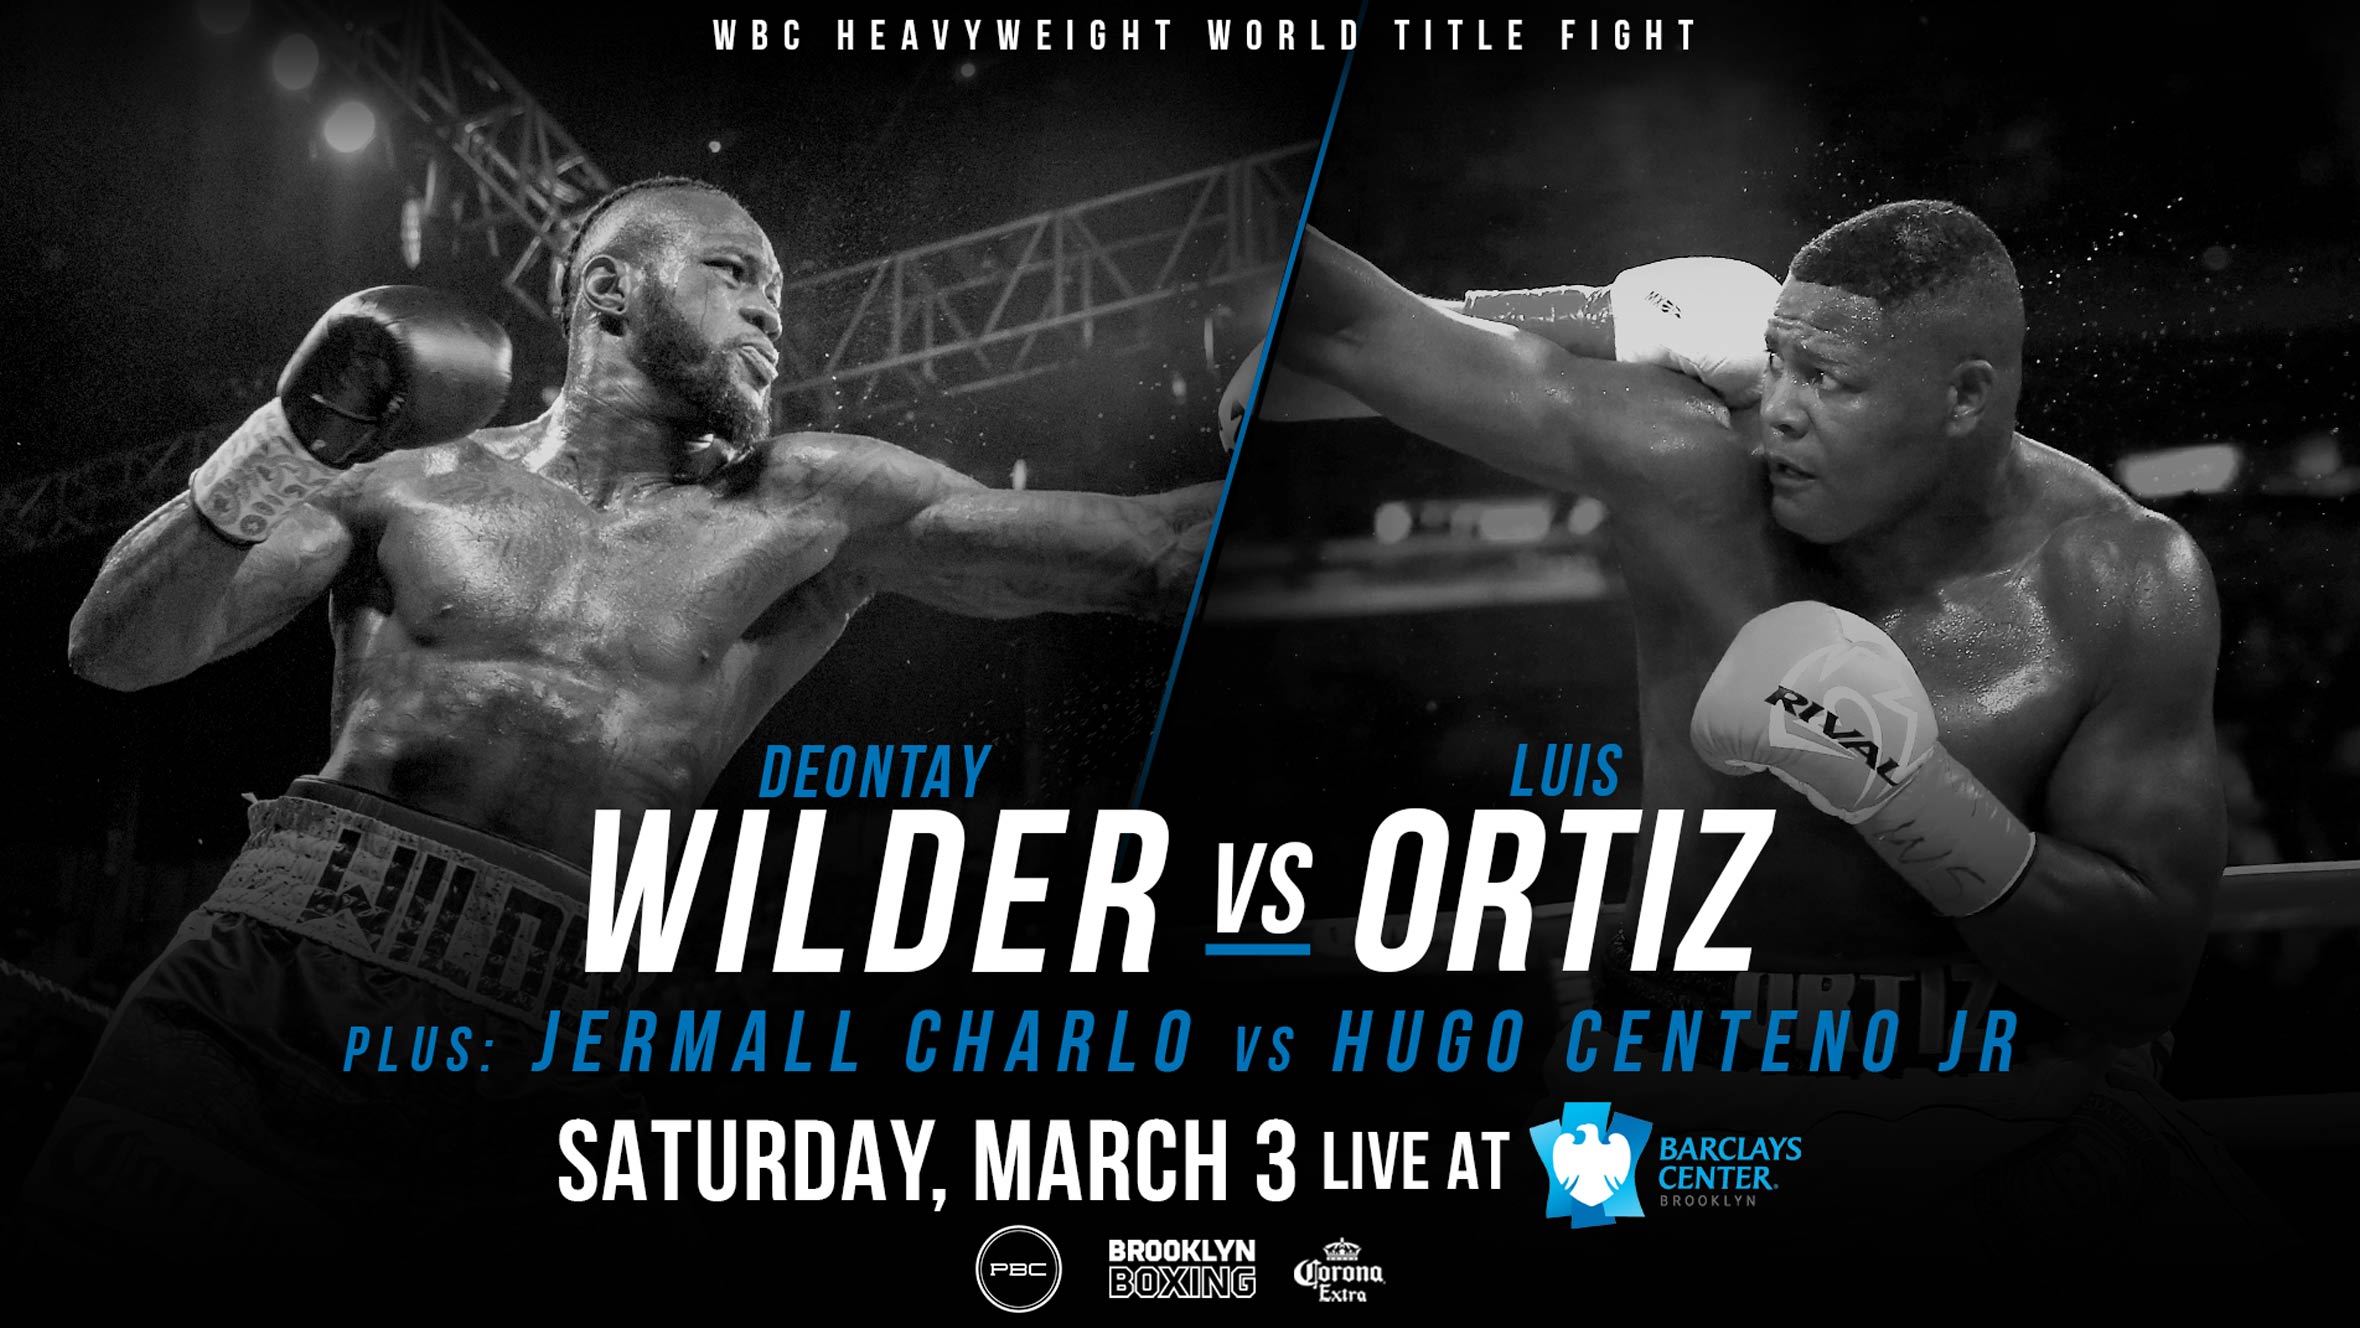 HEAVYWEIGHT WORLD CHAMPION DEONTAY WILDER DEFENDS TITLE AGAINST UNDEFEATED CUBAN CONTENDER LUIS ORTIZ MARCH 3 IN BROOKLYN